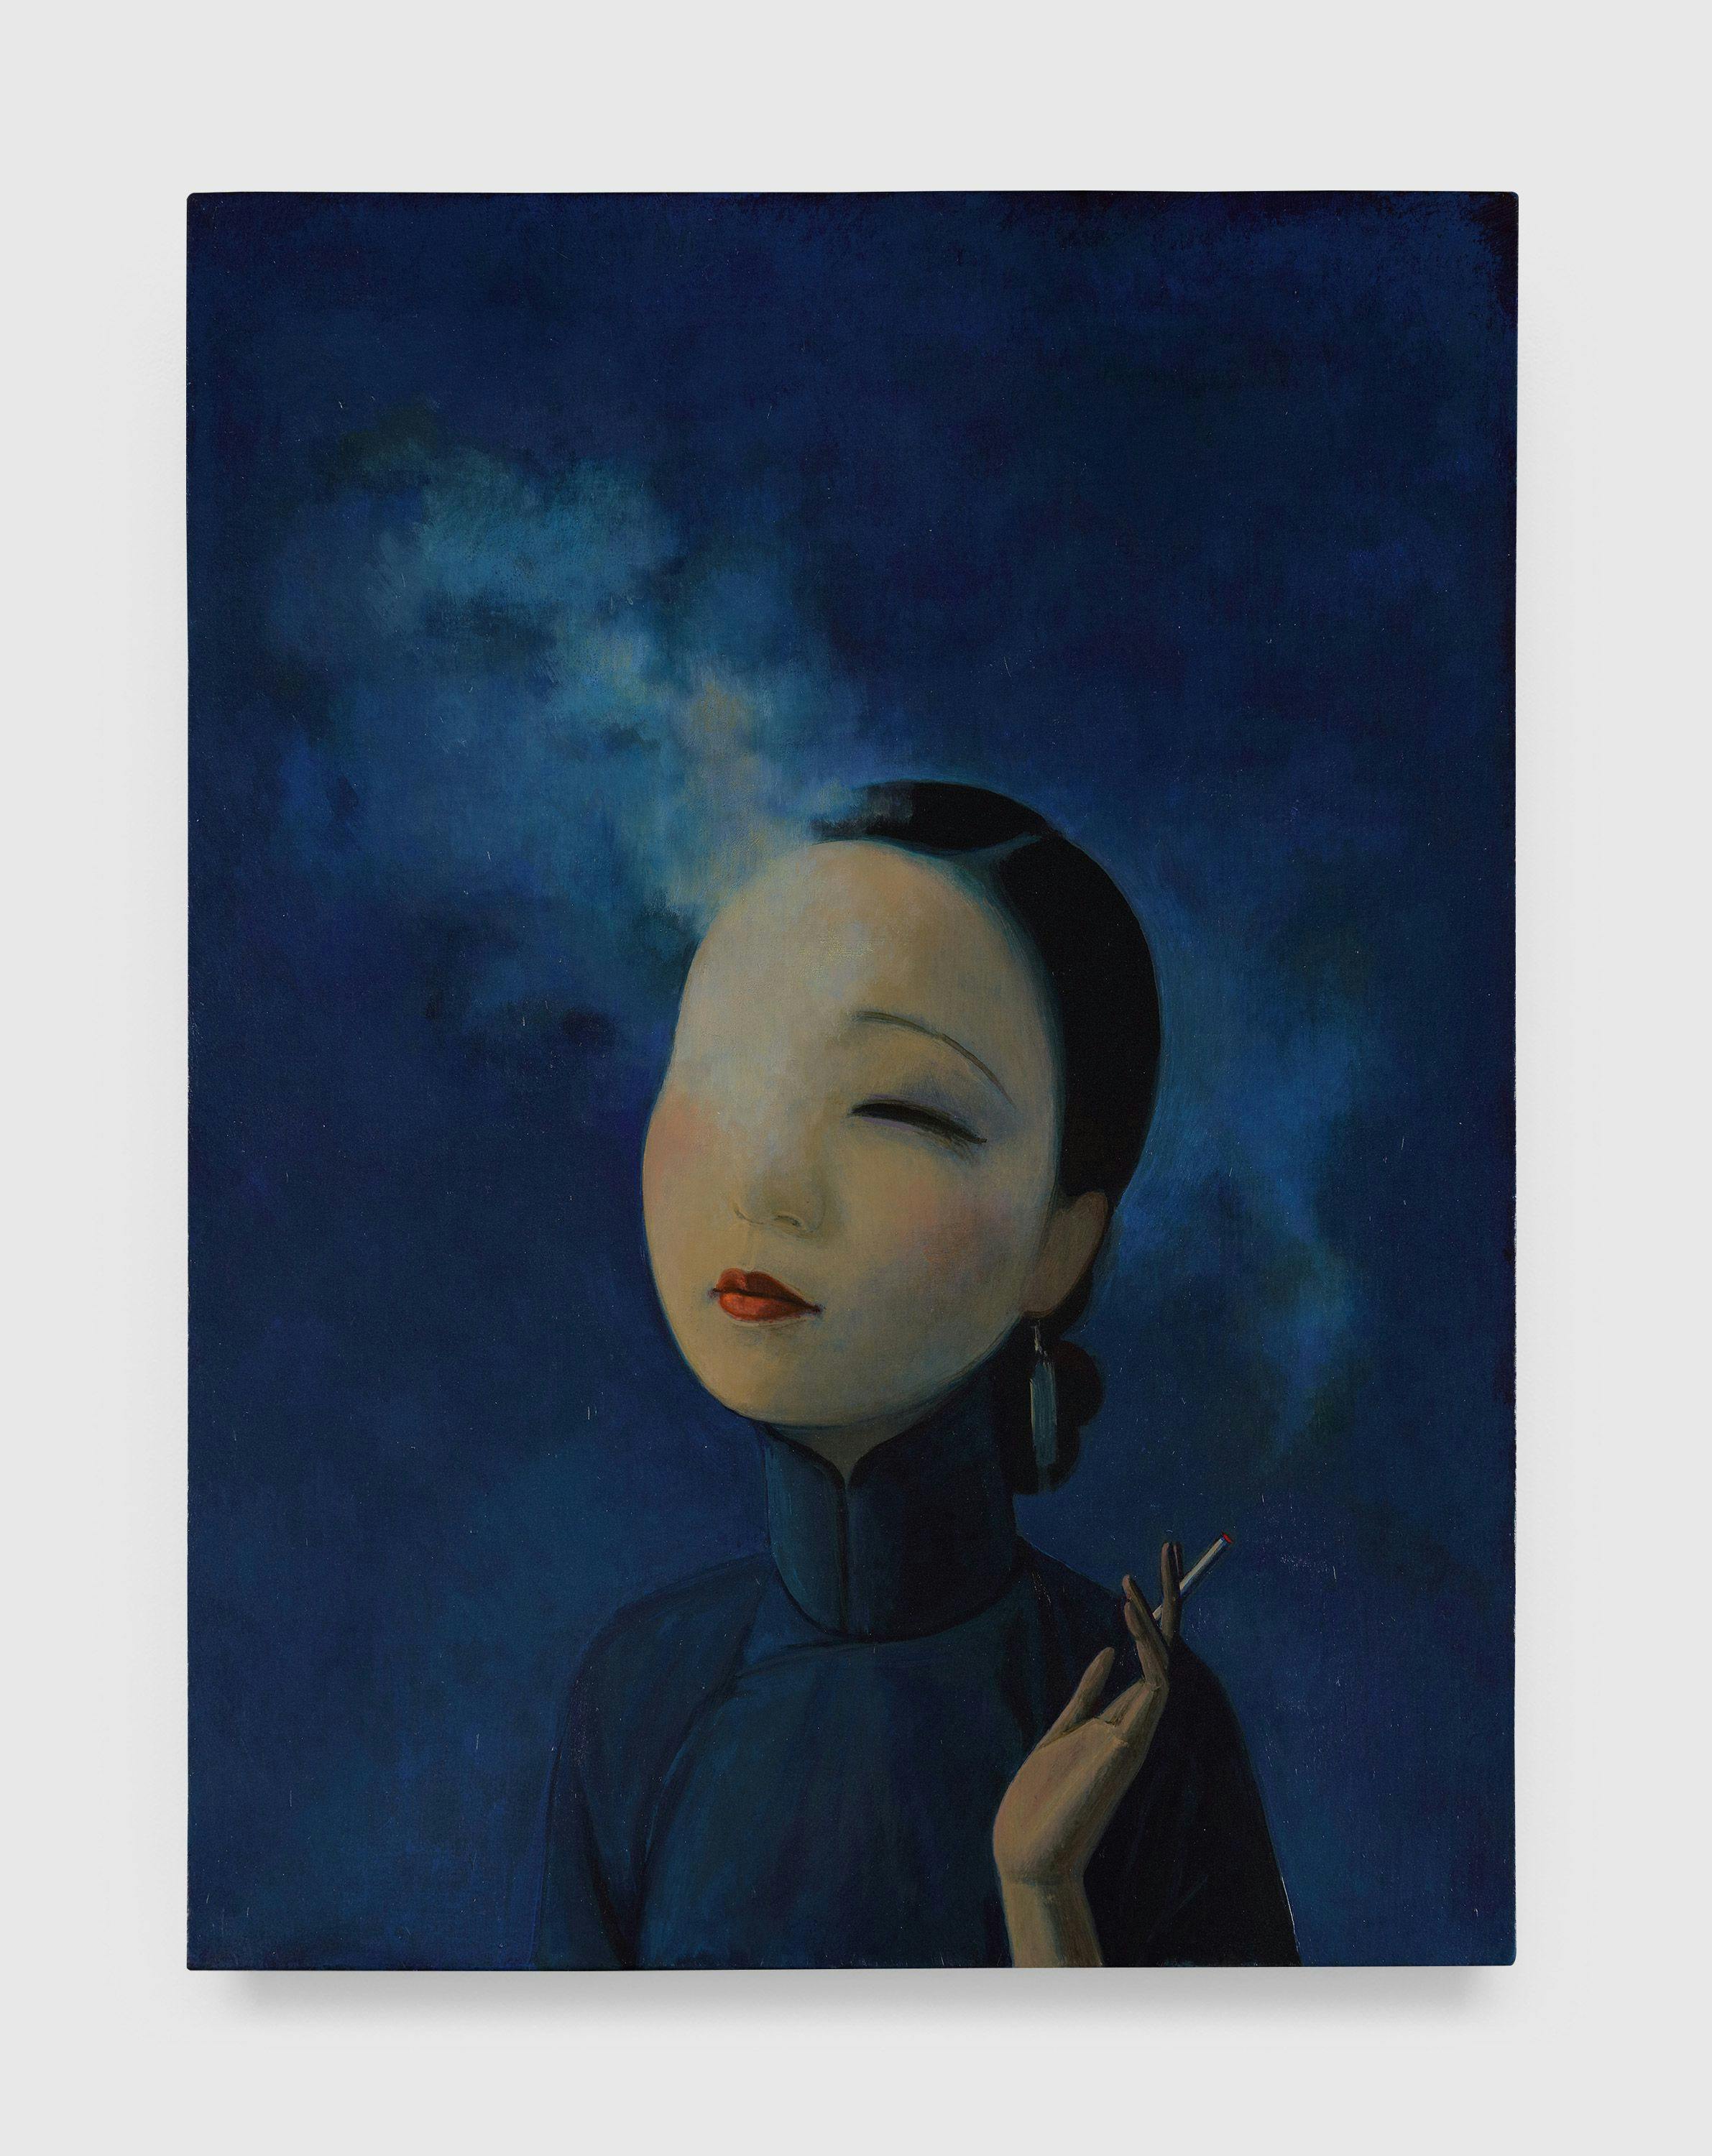 A painting by Liu Ye, titled The Goddess, dated 2018.